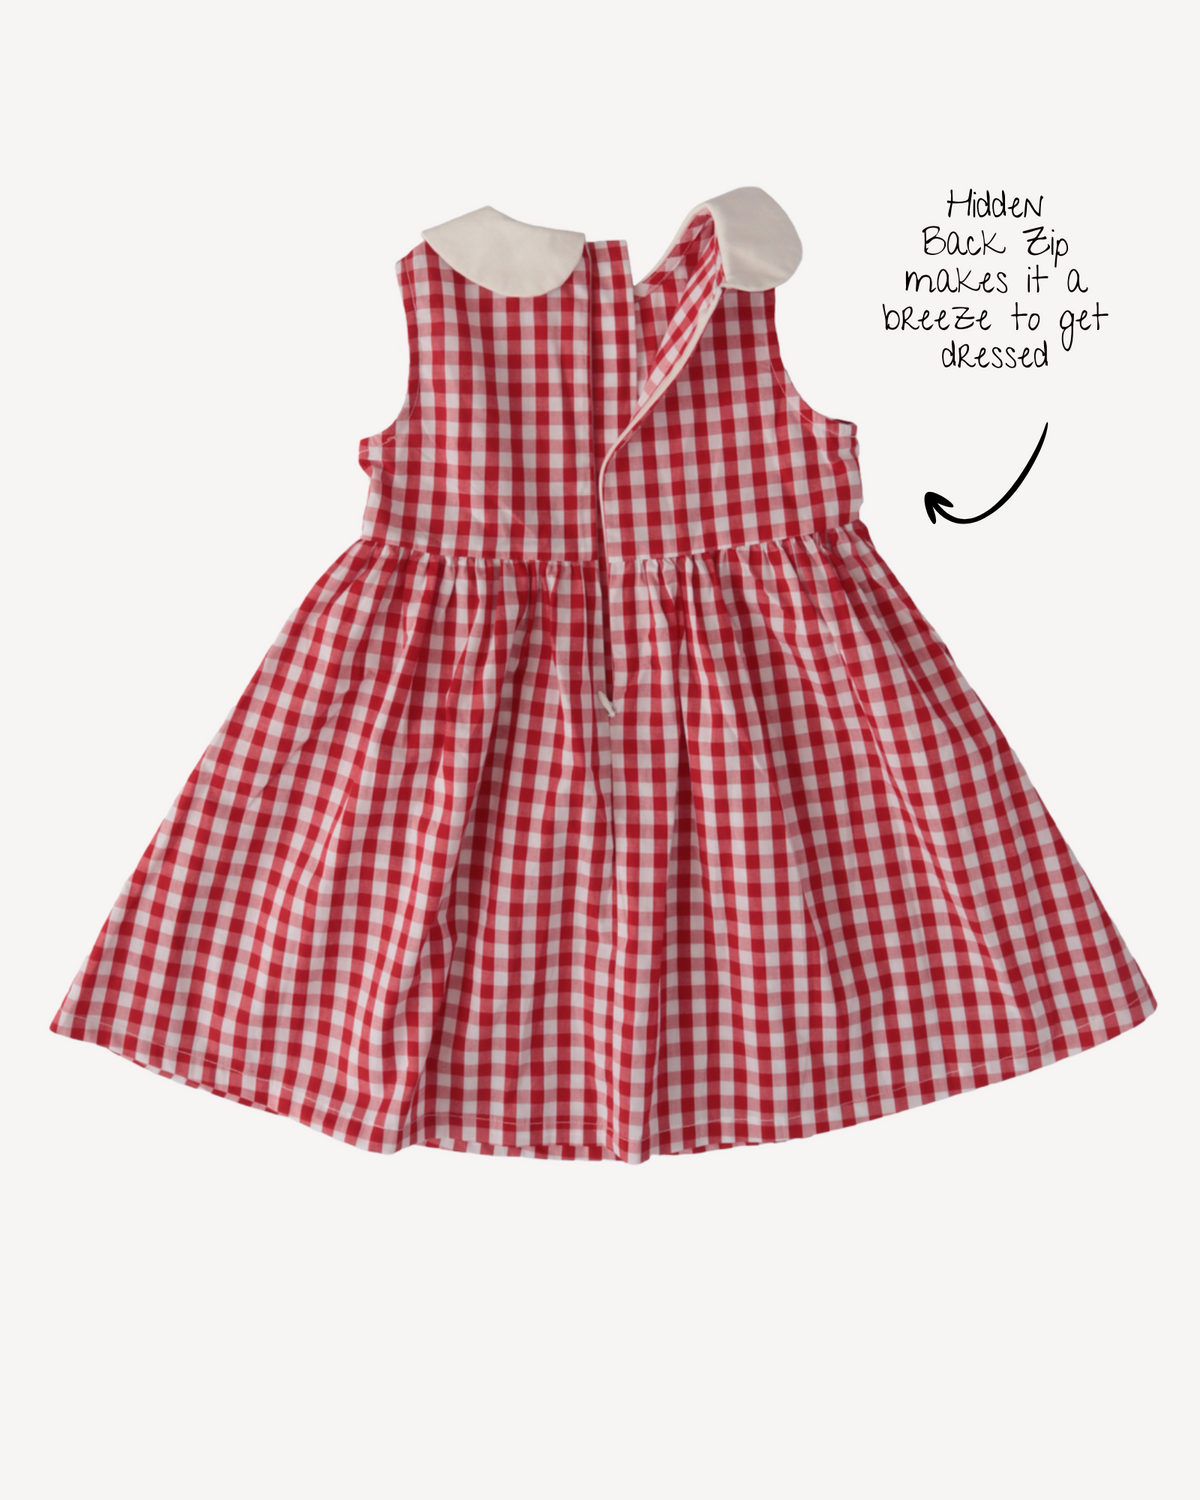 Cherry Dress in Gingham Red